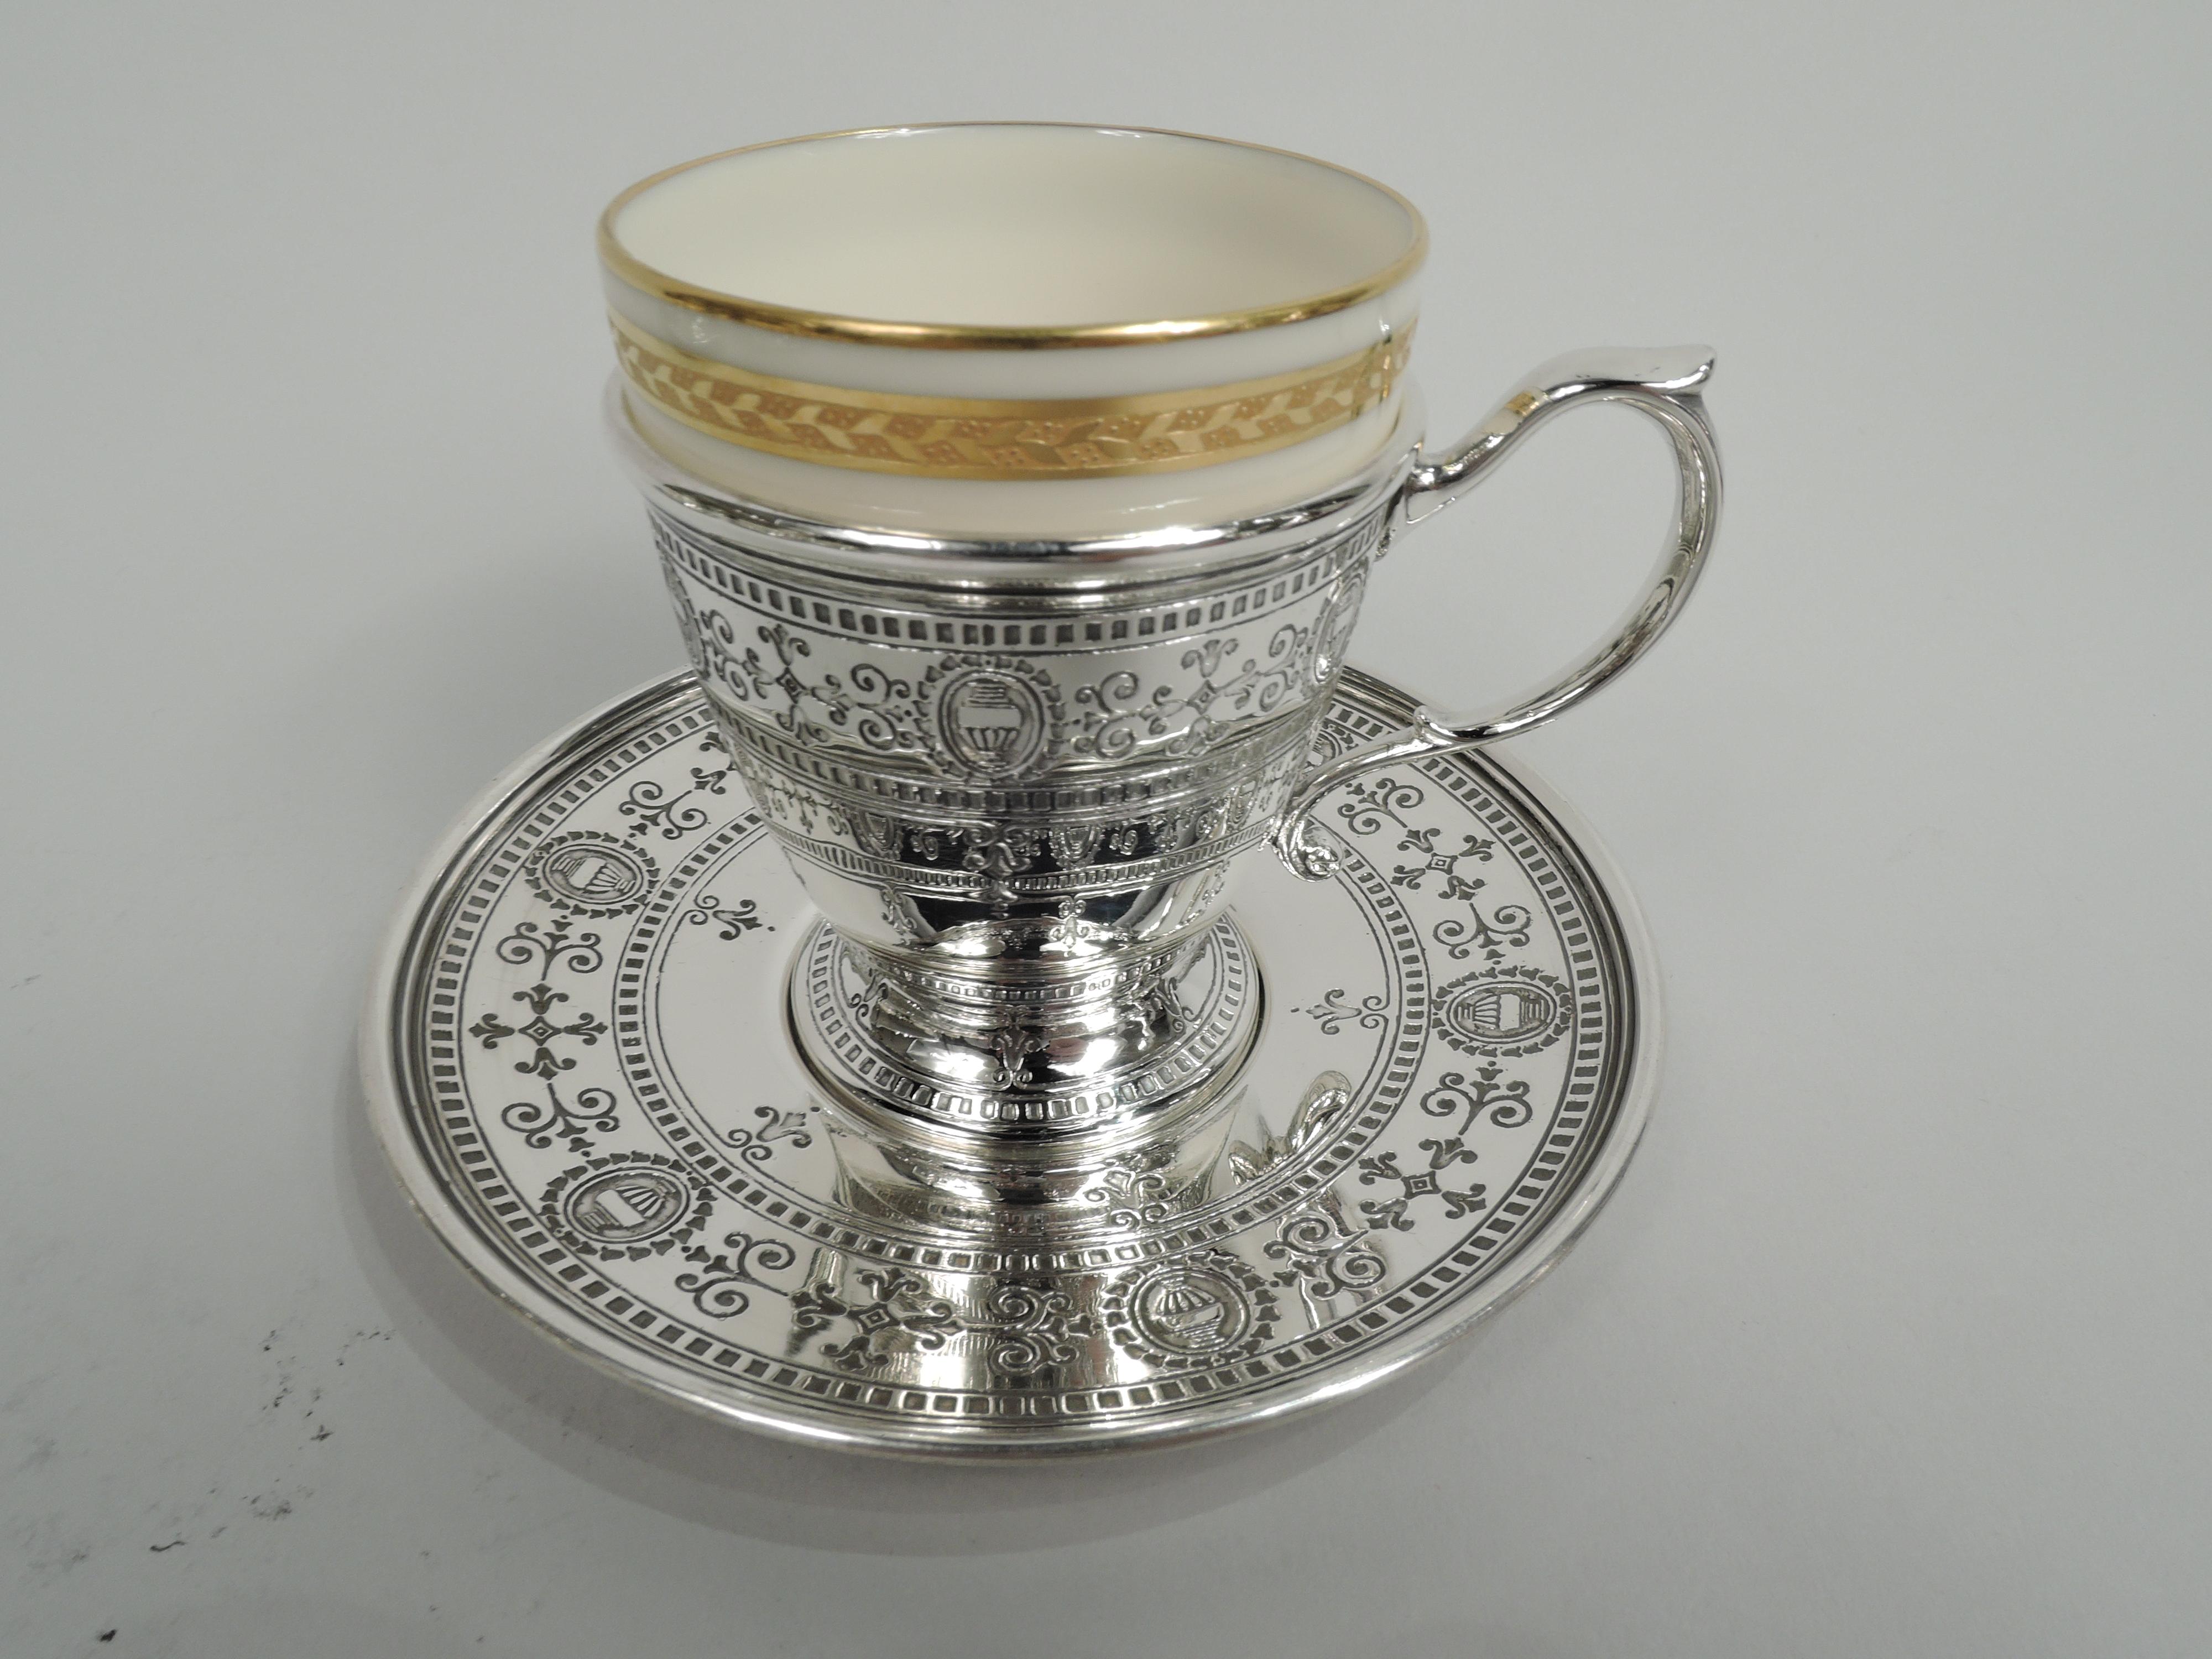 Set of 6 Edwardian Regency sterling silver demitasse holders and saucers. Made by Tiffany & Co. in New York, ca 1914. Each holder: Tapering bowl with open bottom, high-looping capped handle, and raised and spread foot. Each saucer: Round with well